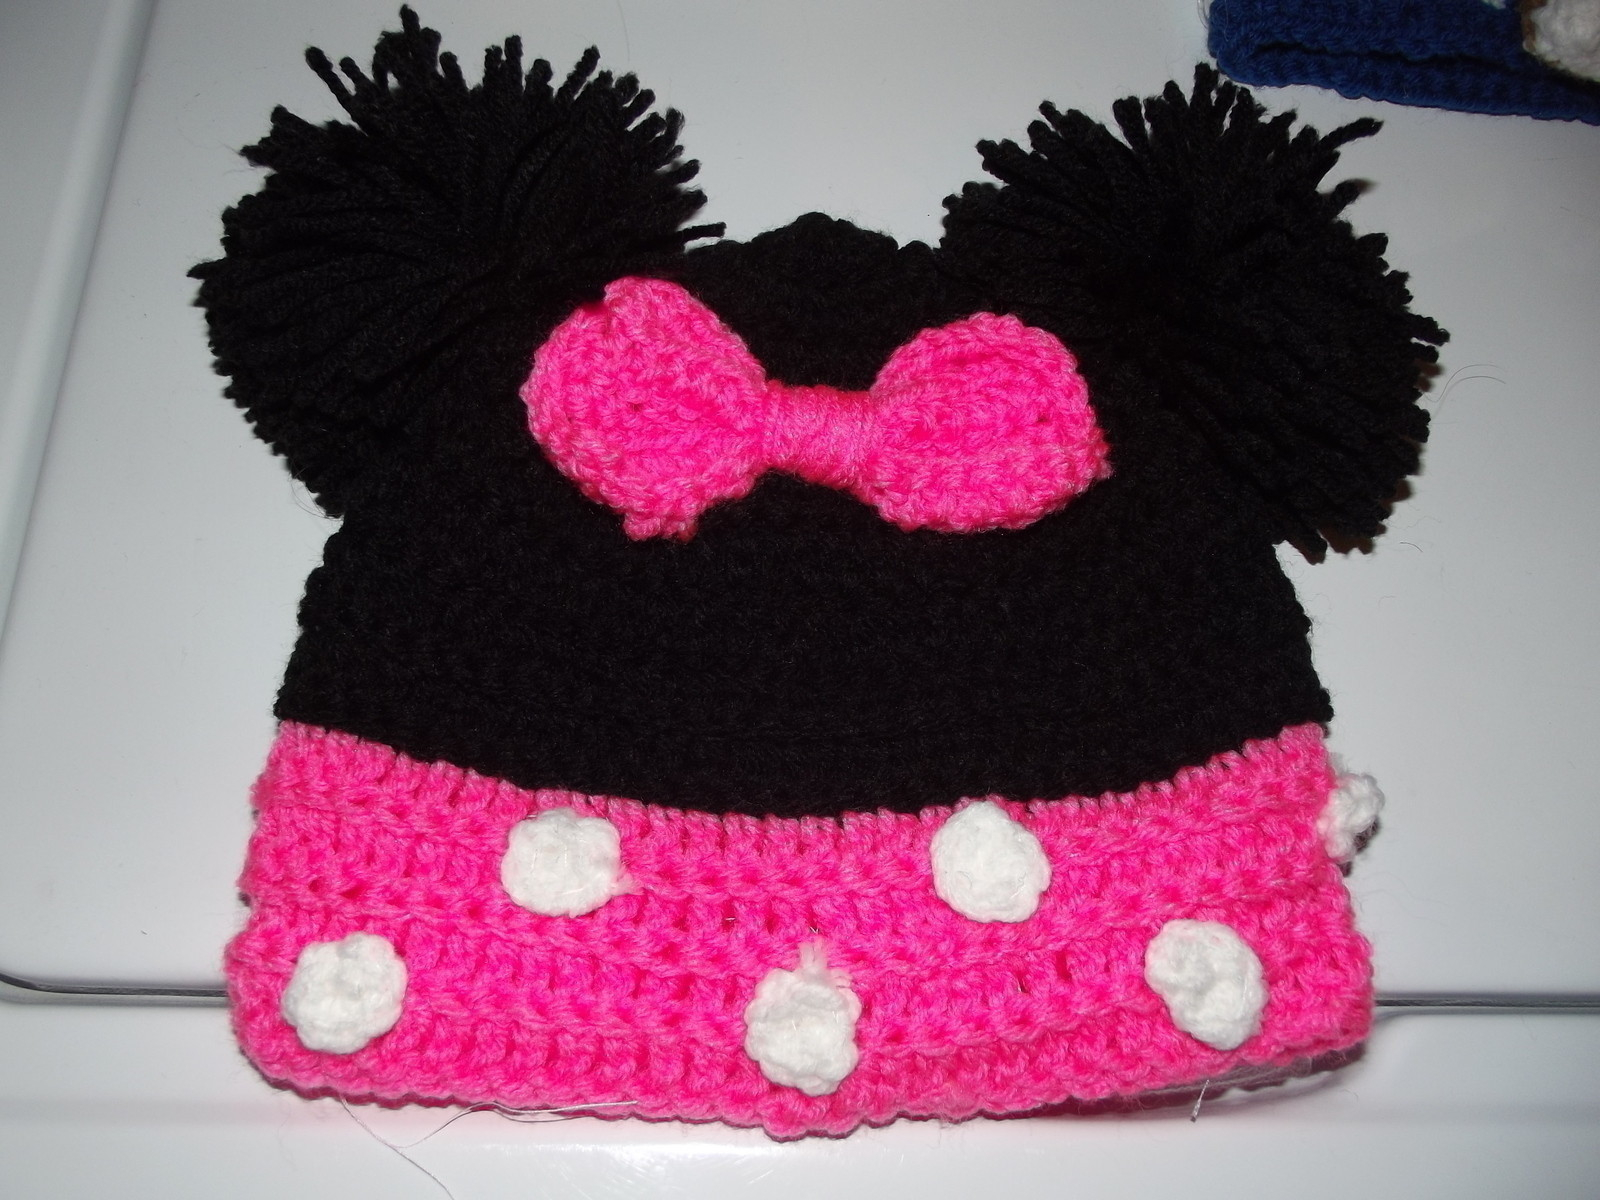 Knitting Pattern For Mickey Mouse Hat Minnie Mouse Hat Version 2with Pom Poms An Animal Hat